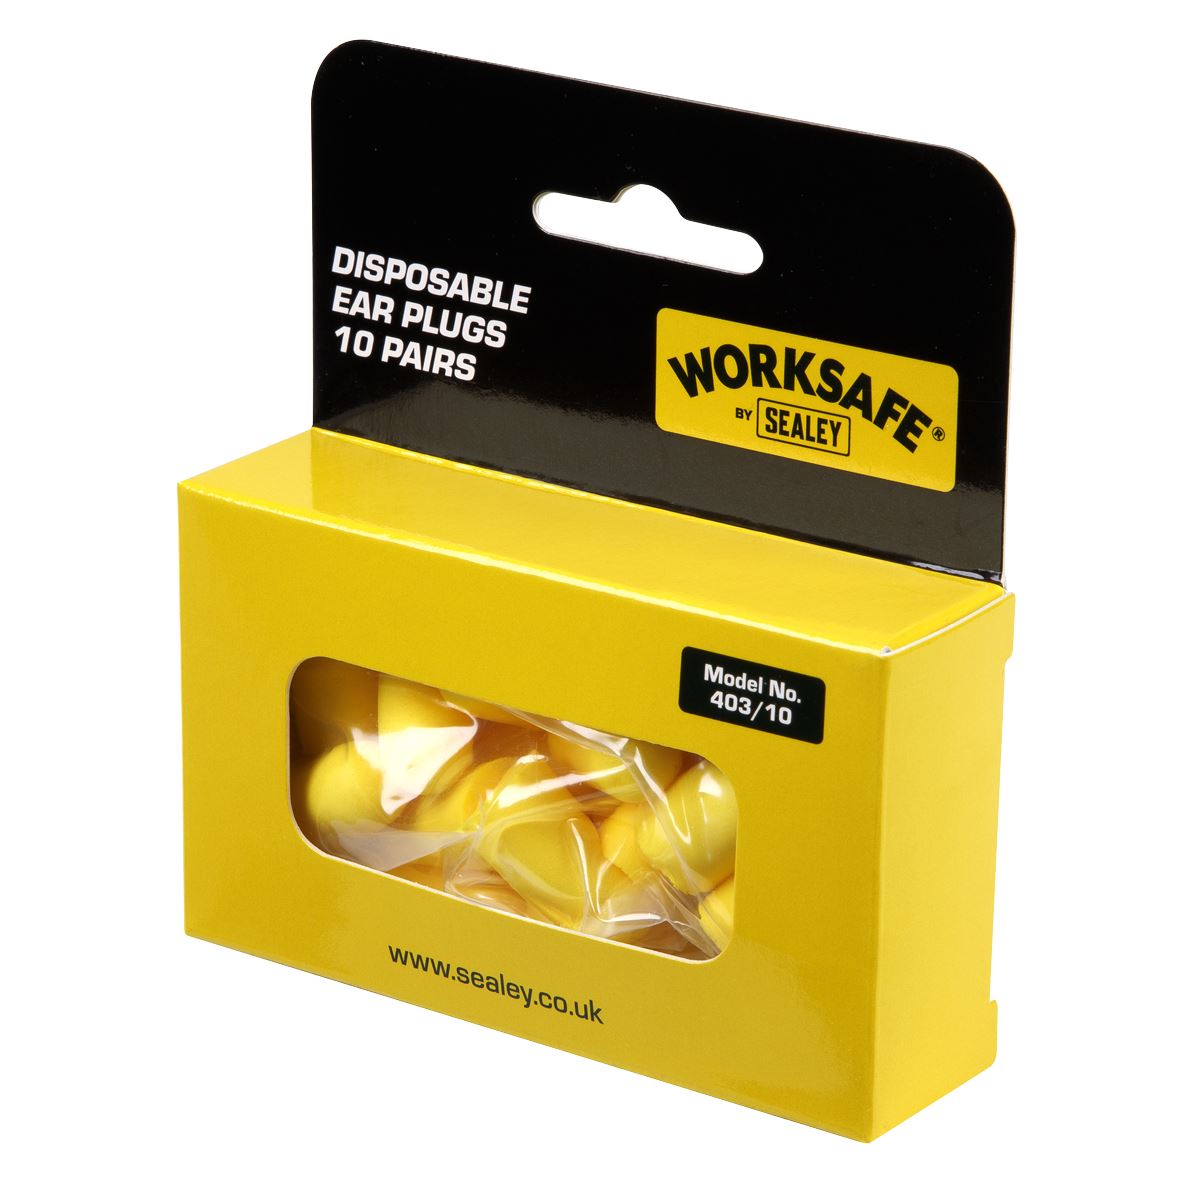 Worksafe by Sealey Ear Plugs Disposable - 10 Pairs